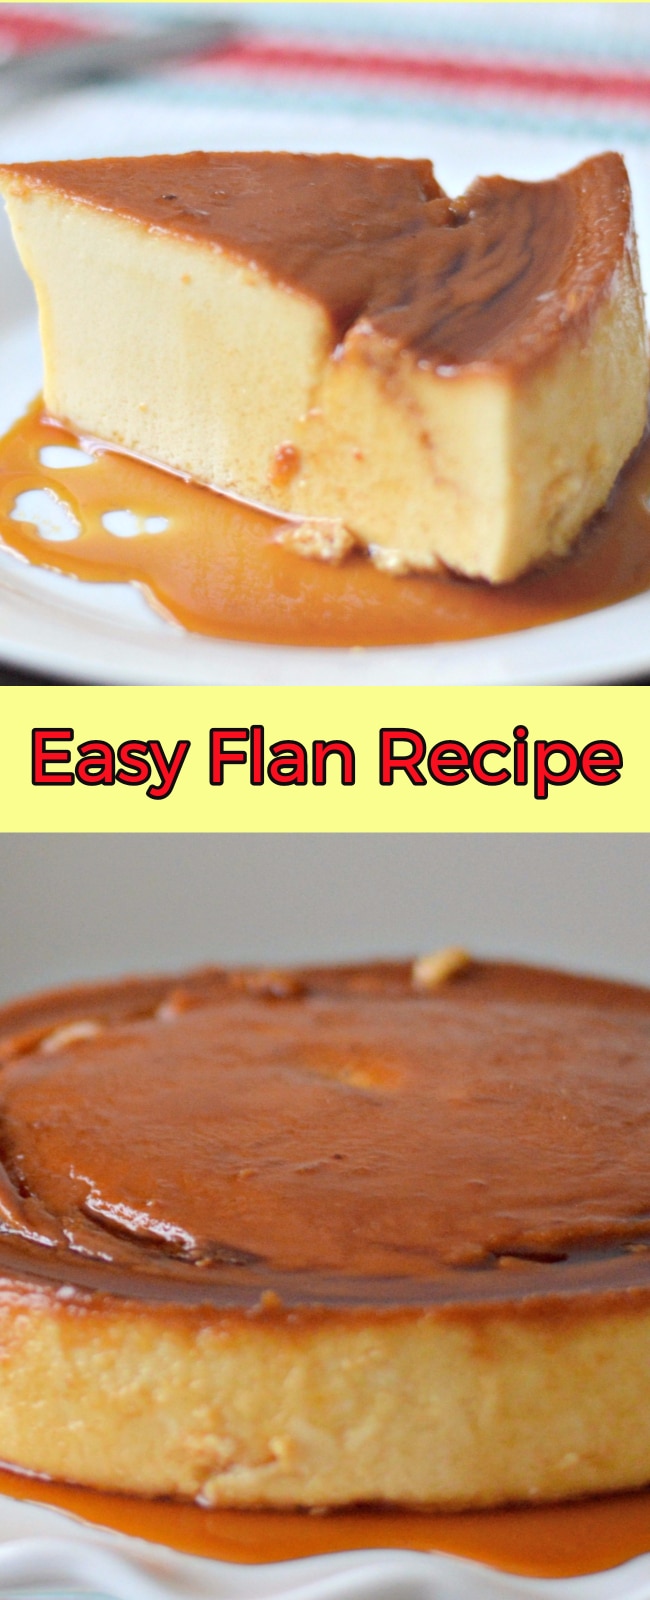 The Easiest Flan Napolitano Recipe - An Authentic Mexican Dessert